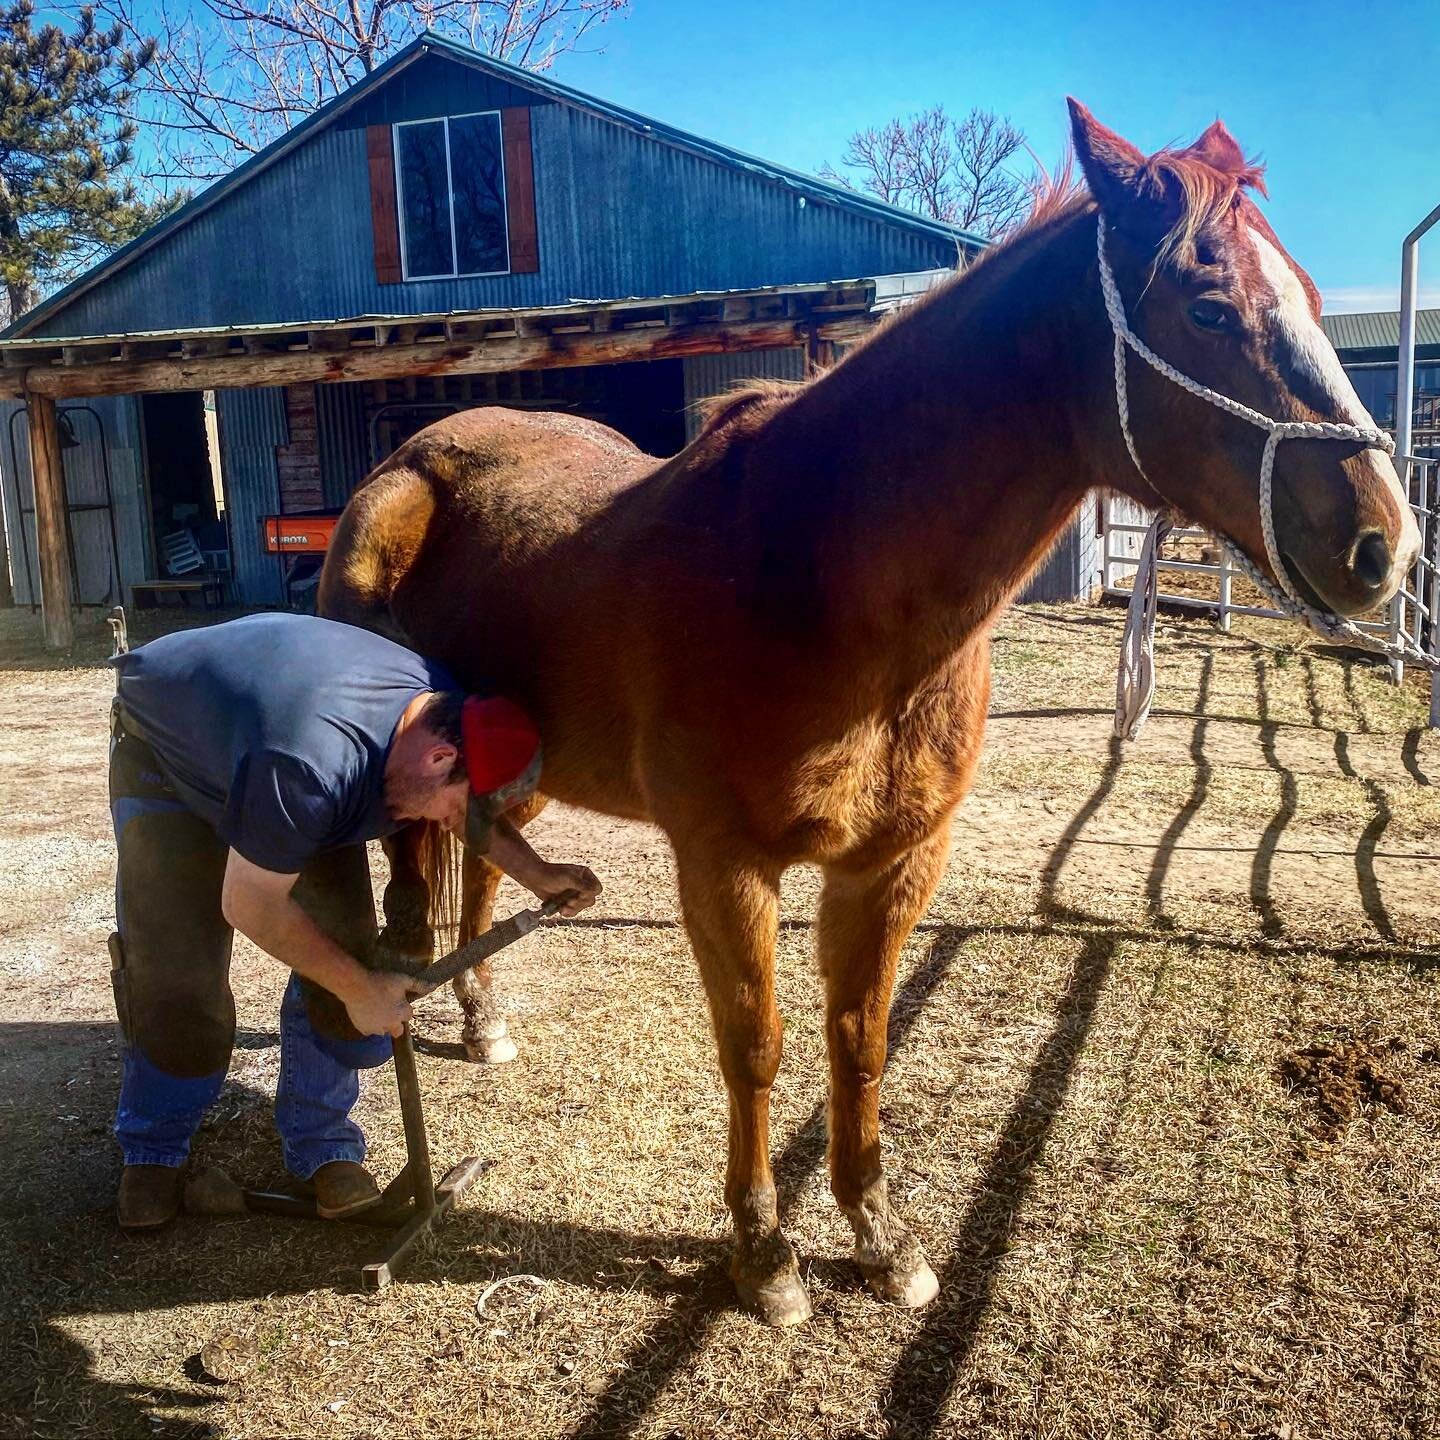 New Shoes!
&bull;
Every 6 weeks Matt comes and does his magic. Matt has been our farrier for YEARS!  He has put new shoes on ranch horses and kid horses.  He has used his knowledge and expertise to add &ldquo;wedges&rdquo; to a couple of old geldings